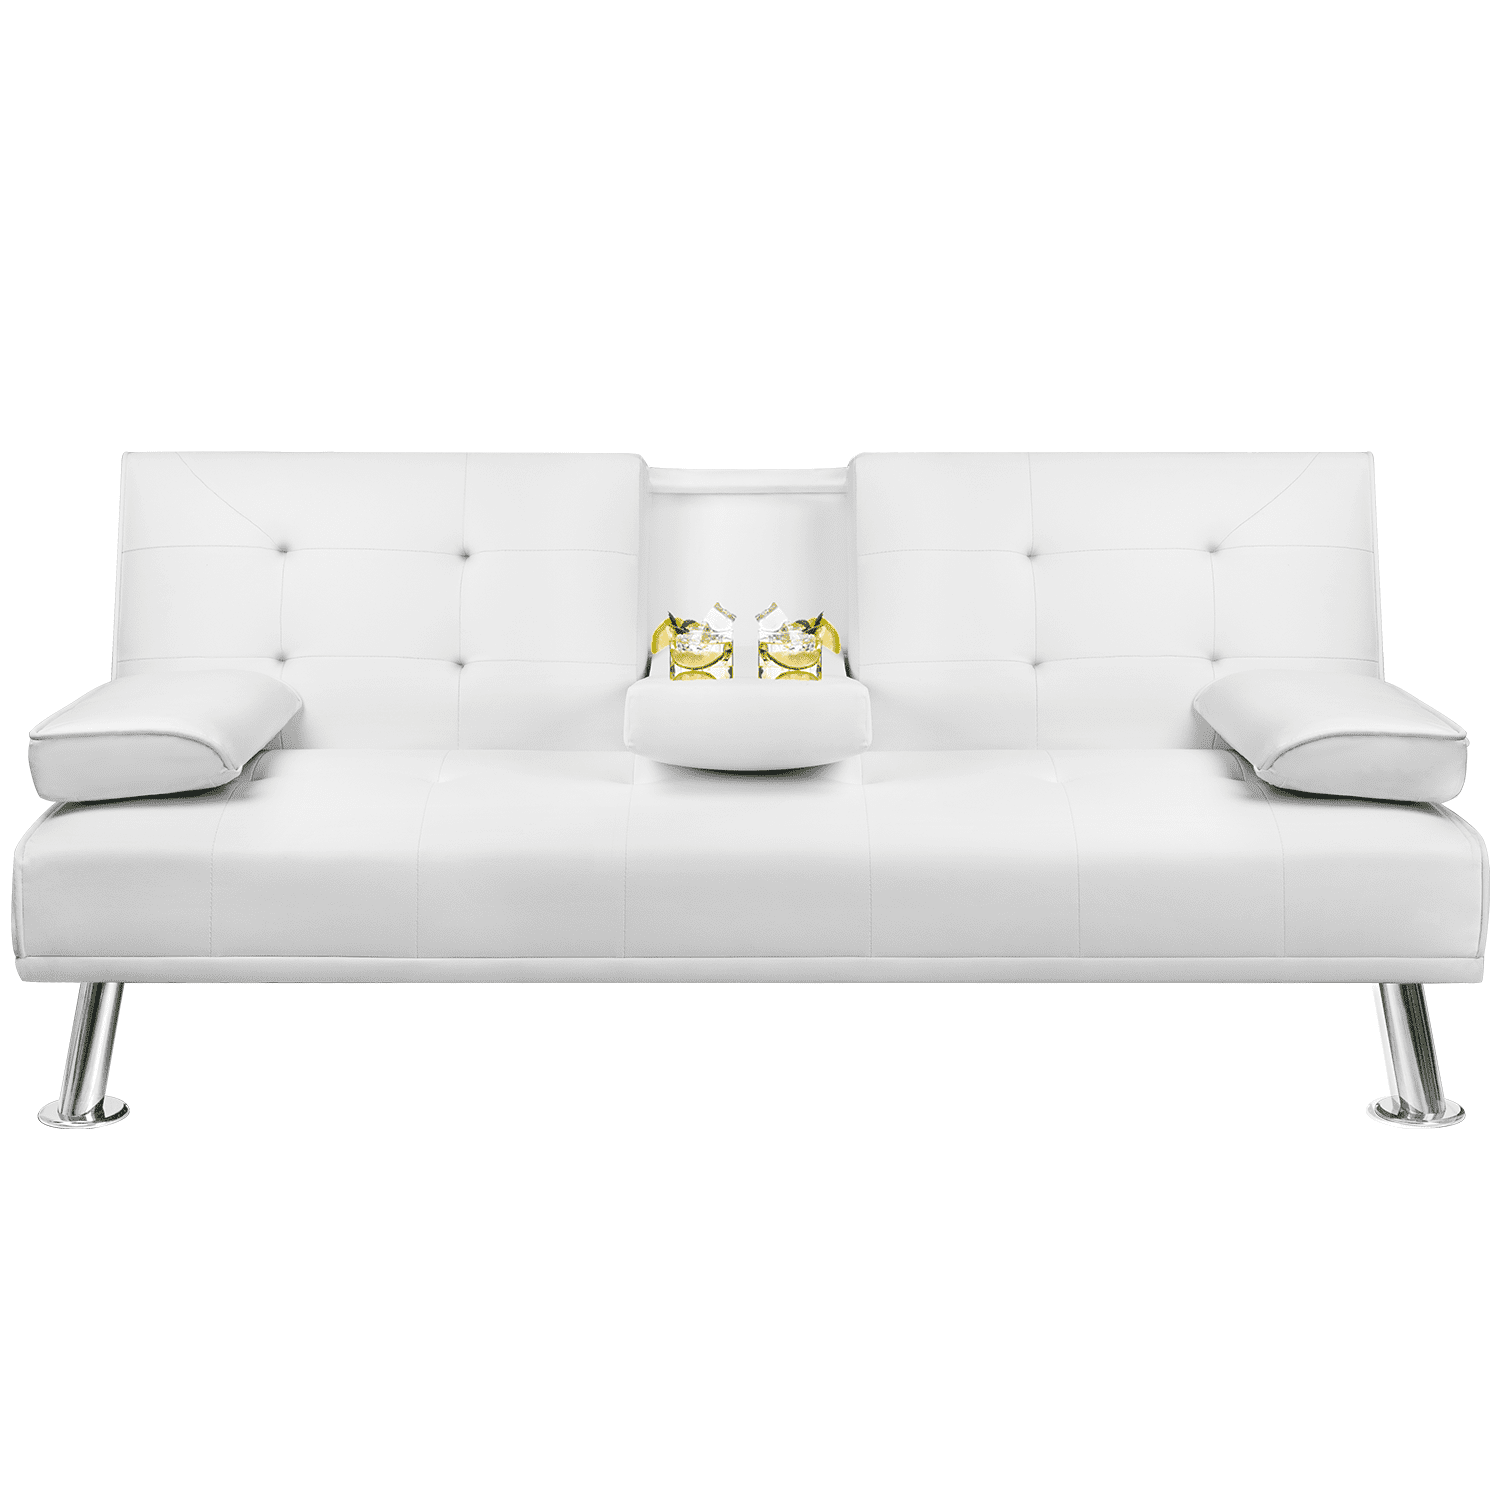 Lacoo Modern Faux Leather Convertible Futon with Cup Holders & Pillows, 65" White